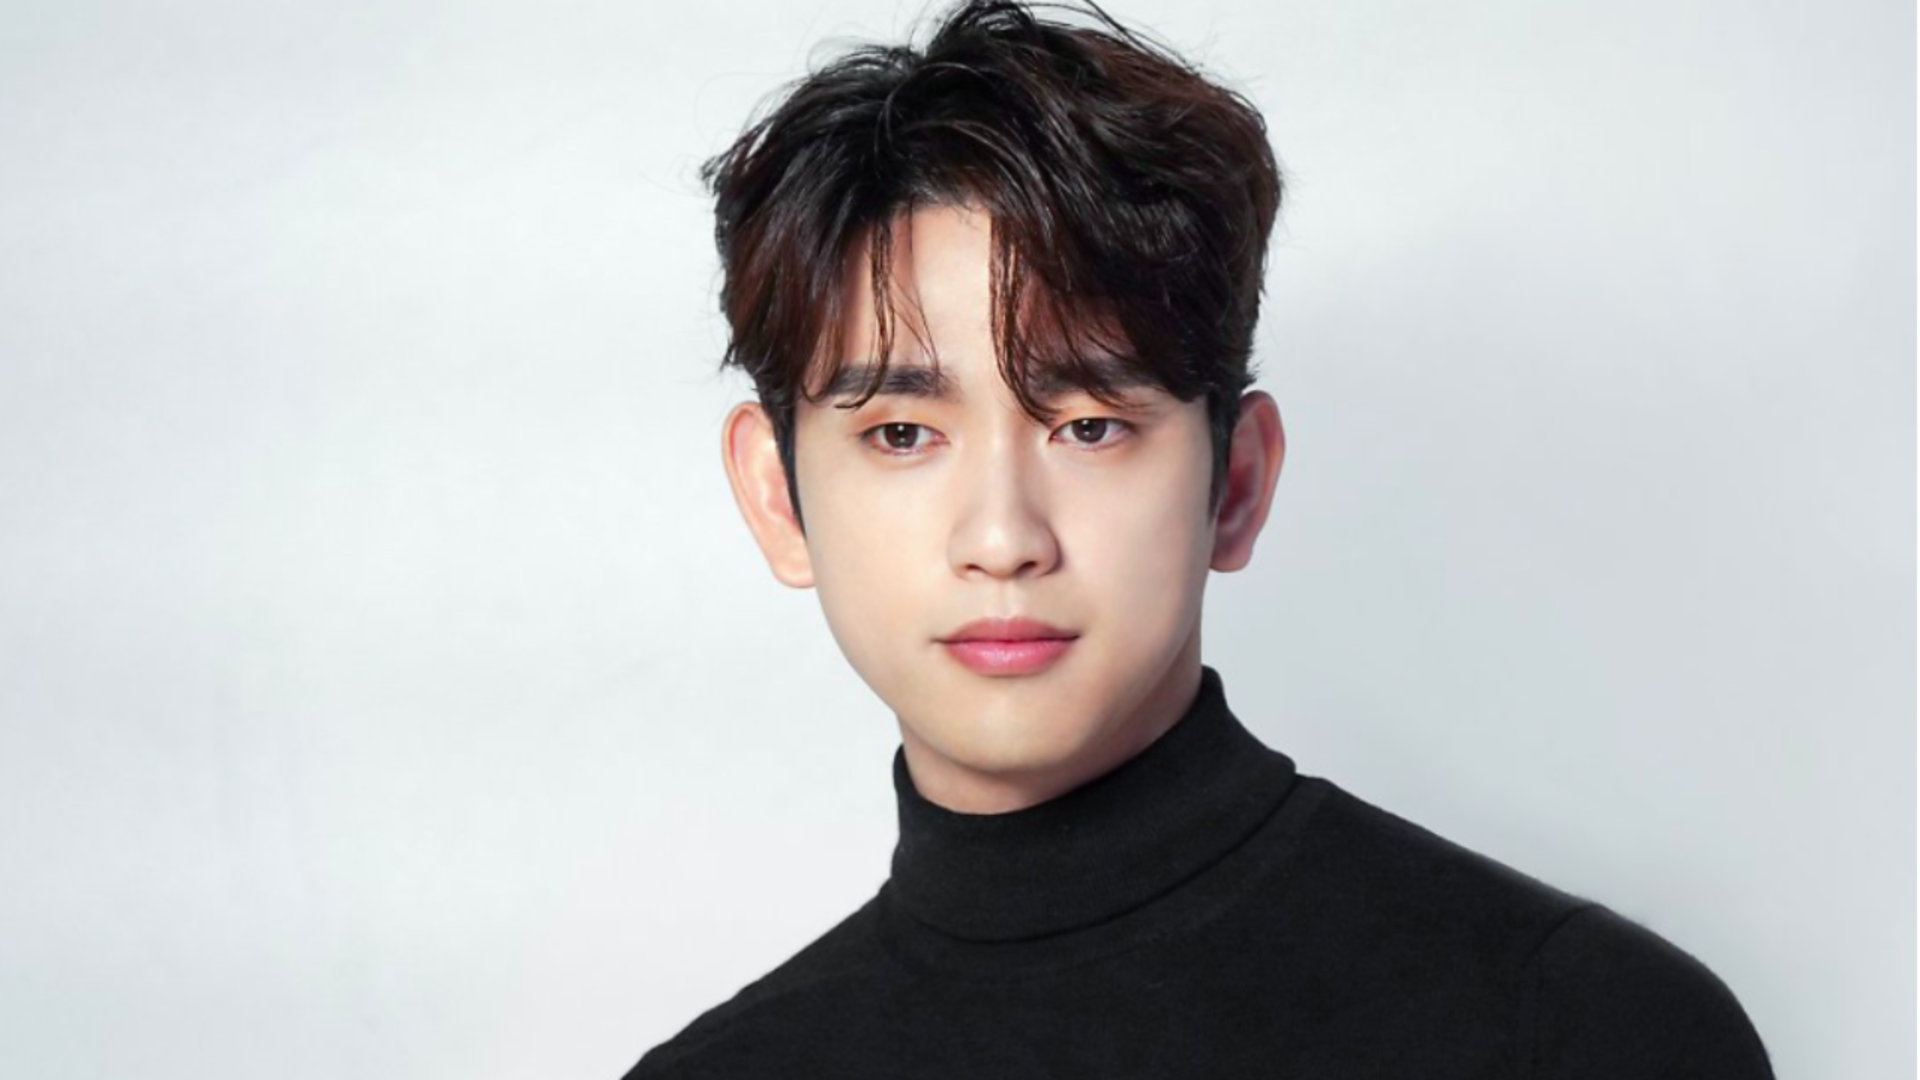 K-pop: GOT7's Jinyoung set for military enlistment; agency shares statement